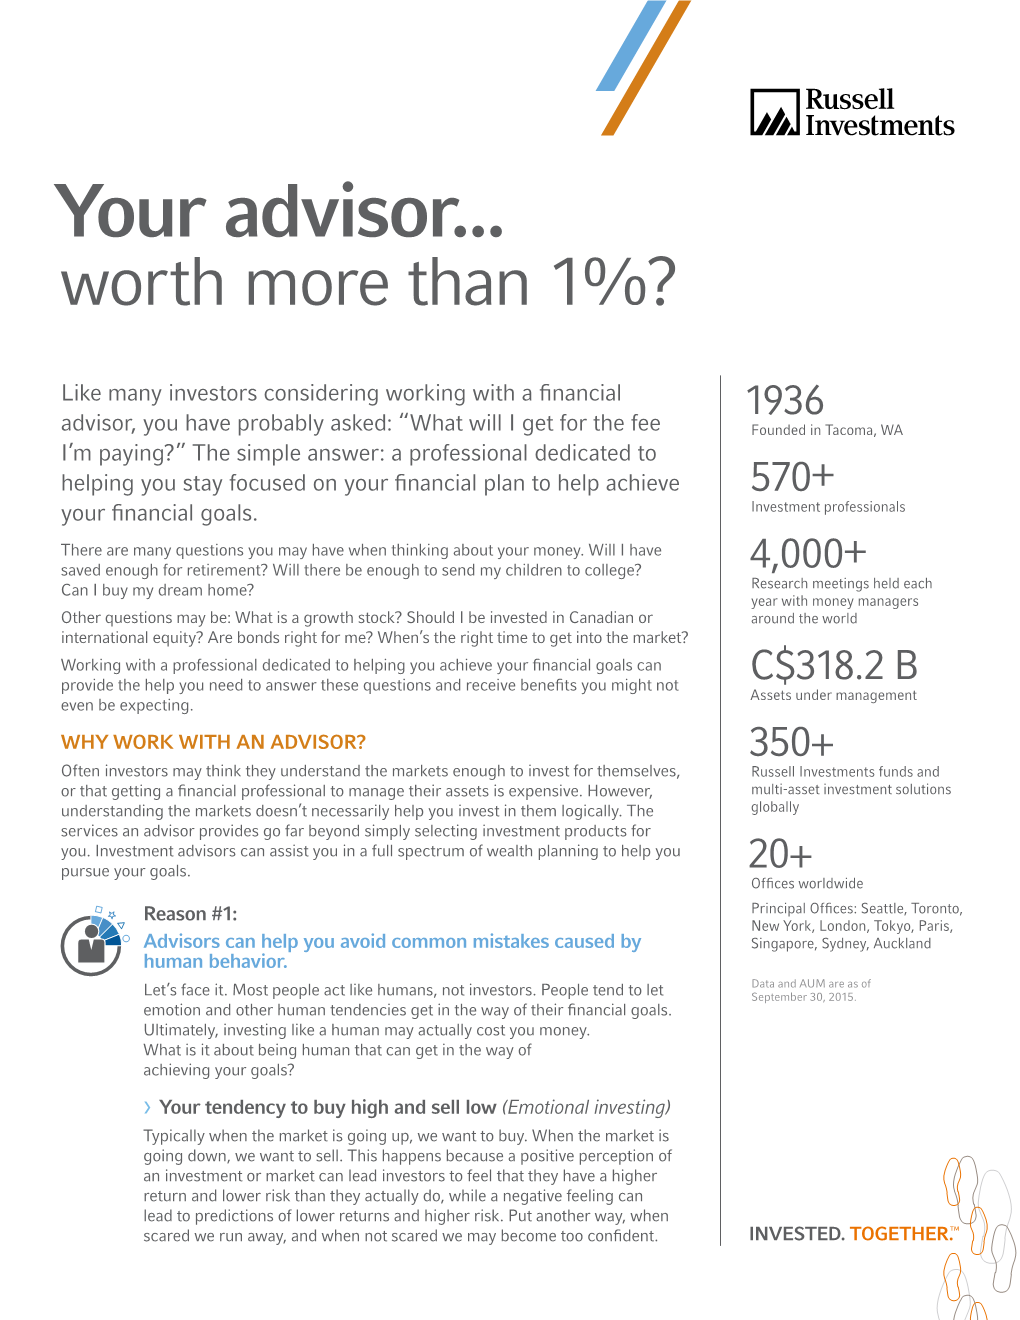 Your Advisor...Worth More Than 1% // Russell Investments / Page 2